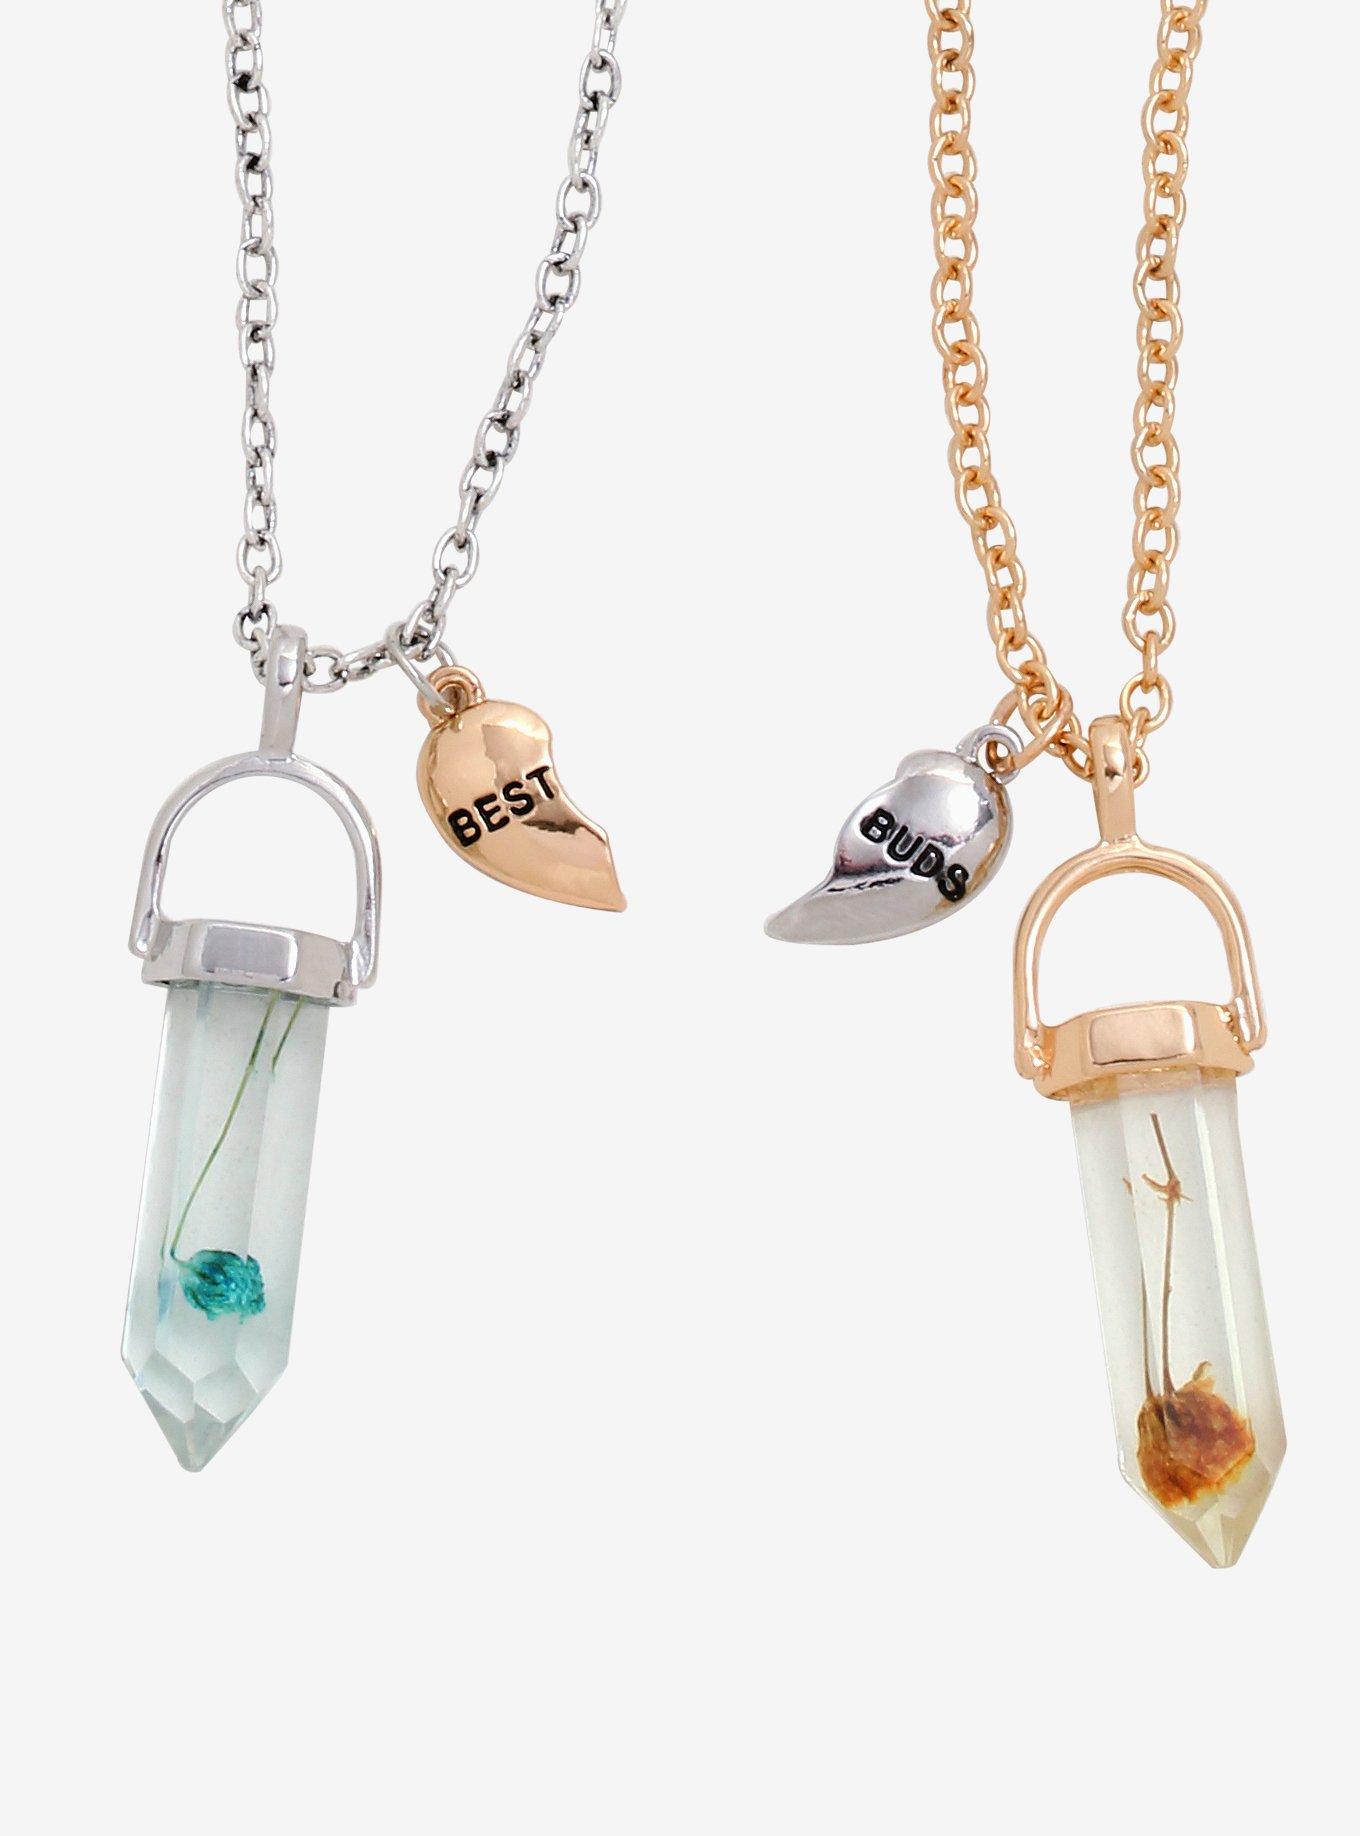 Dried Flower Crystals Best Friend Necklace Set | Hot Topic